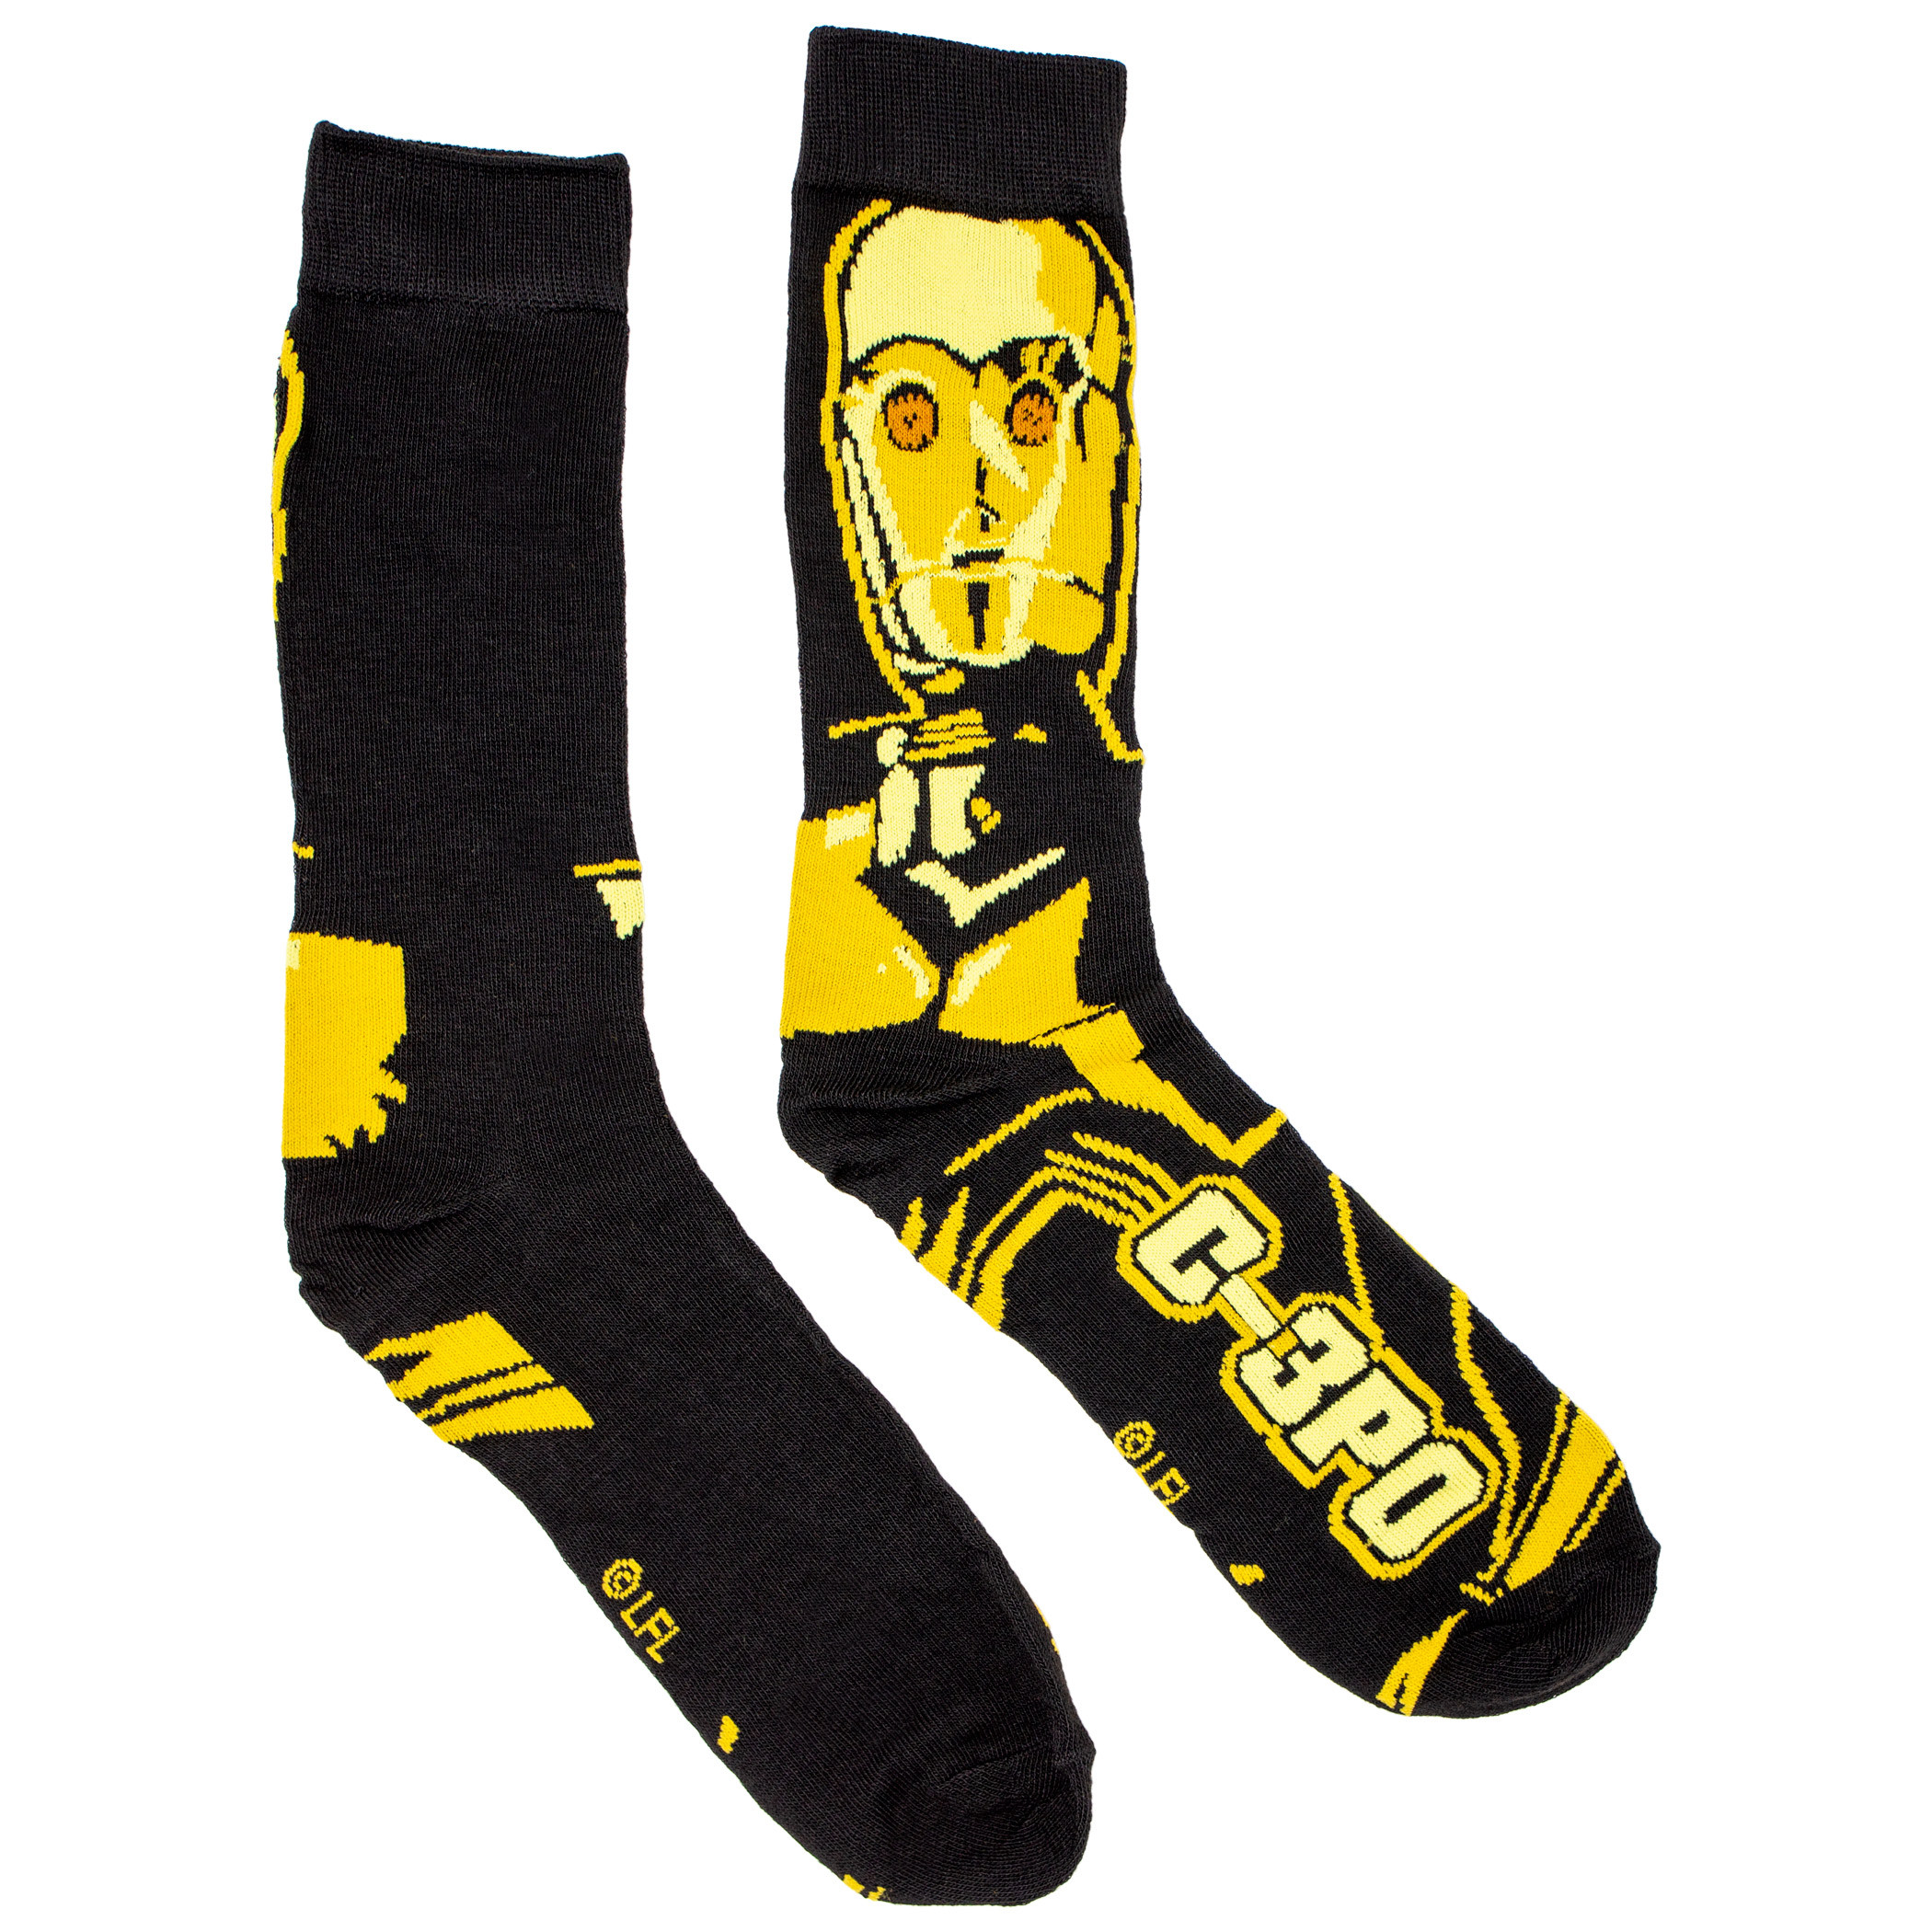 Star Wars R2-D2 and C-3PO Character Crew Socks 2-Pack